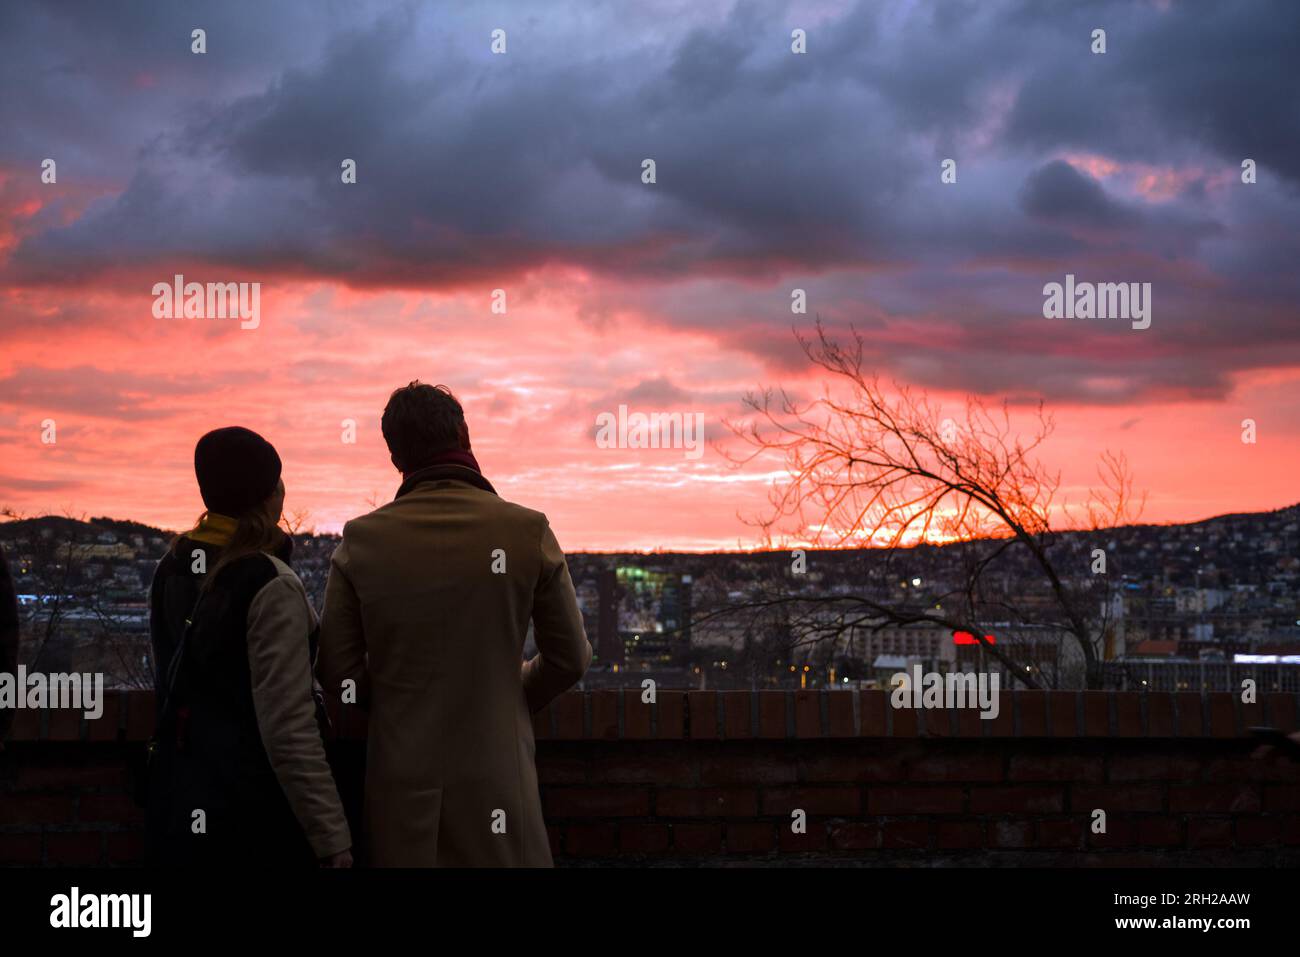 Silhouette of a couple against stormy sunset Stock Photo